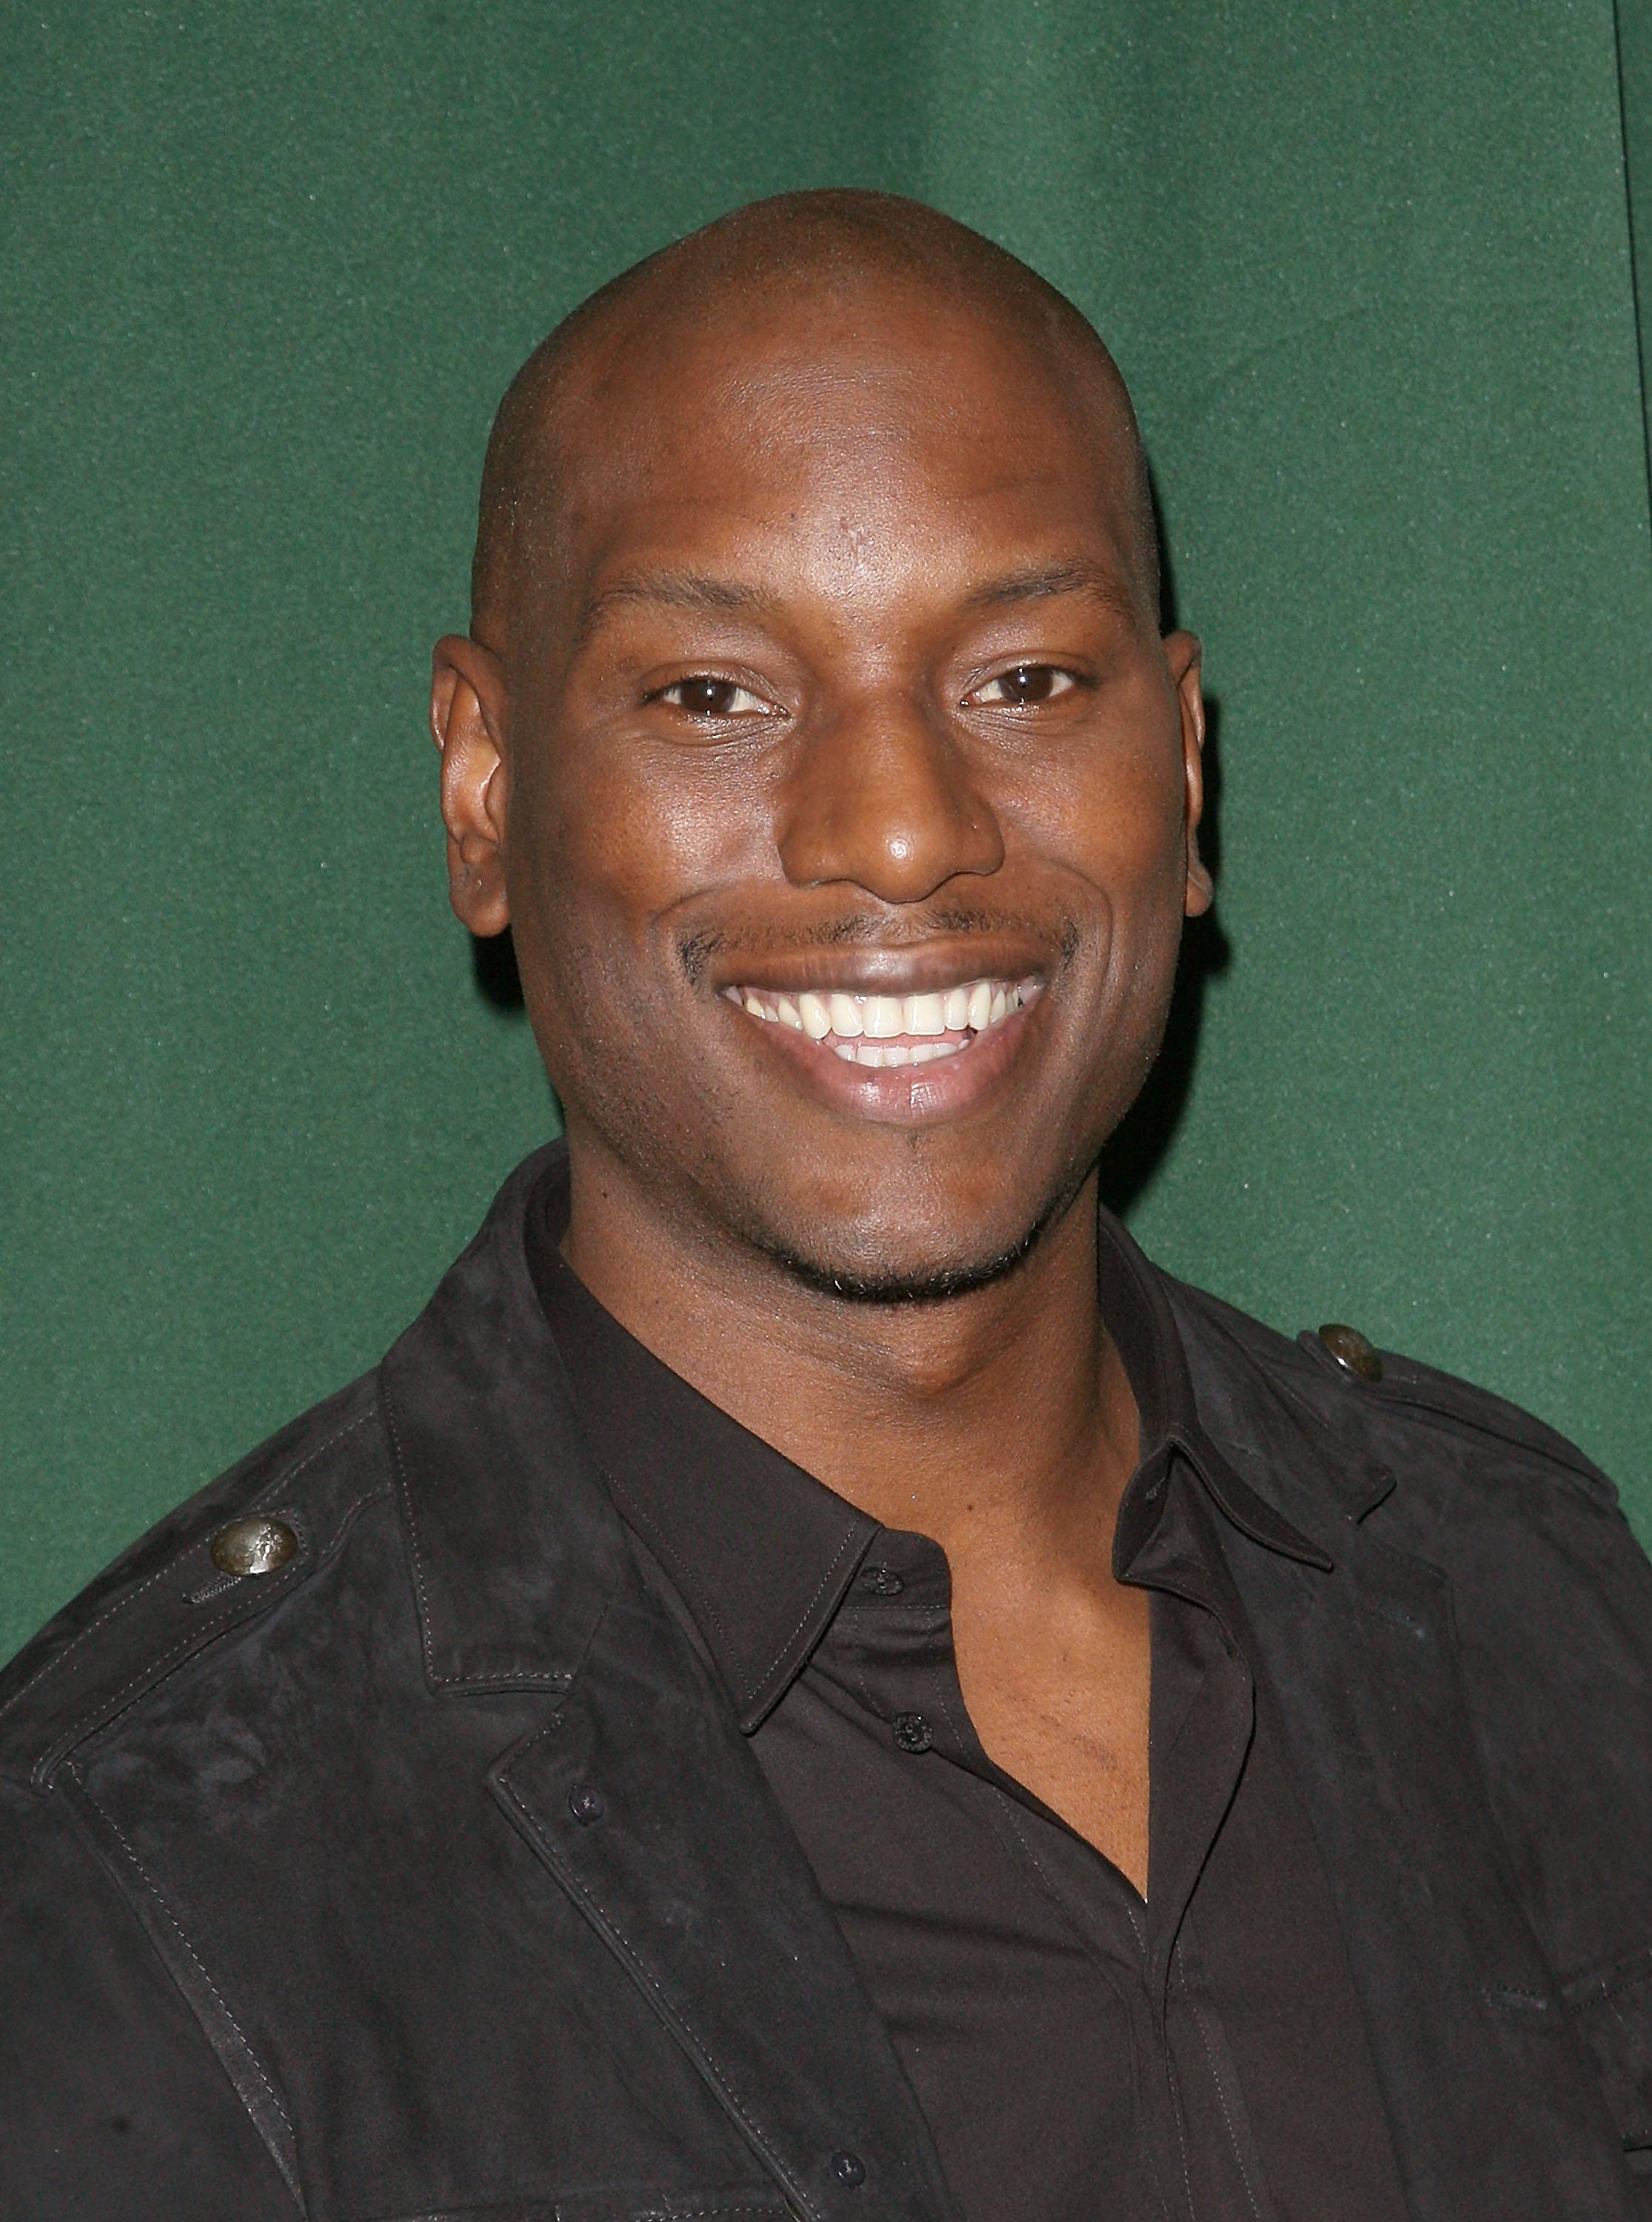 Tyrese Gibson Signs Copies Of 'Tyrese Gibson: How to Get Out of Your Own Way' - April 7, 2011